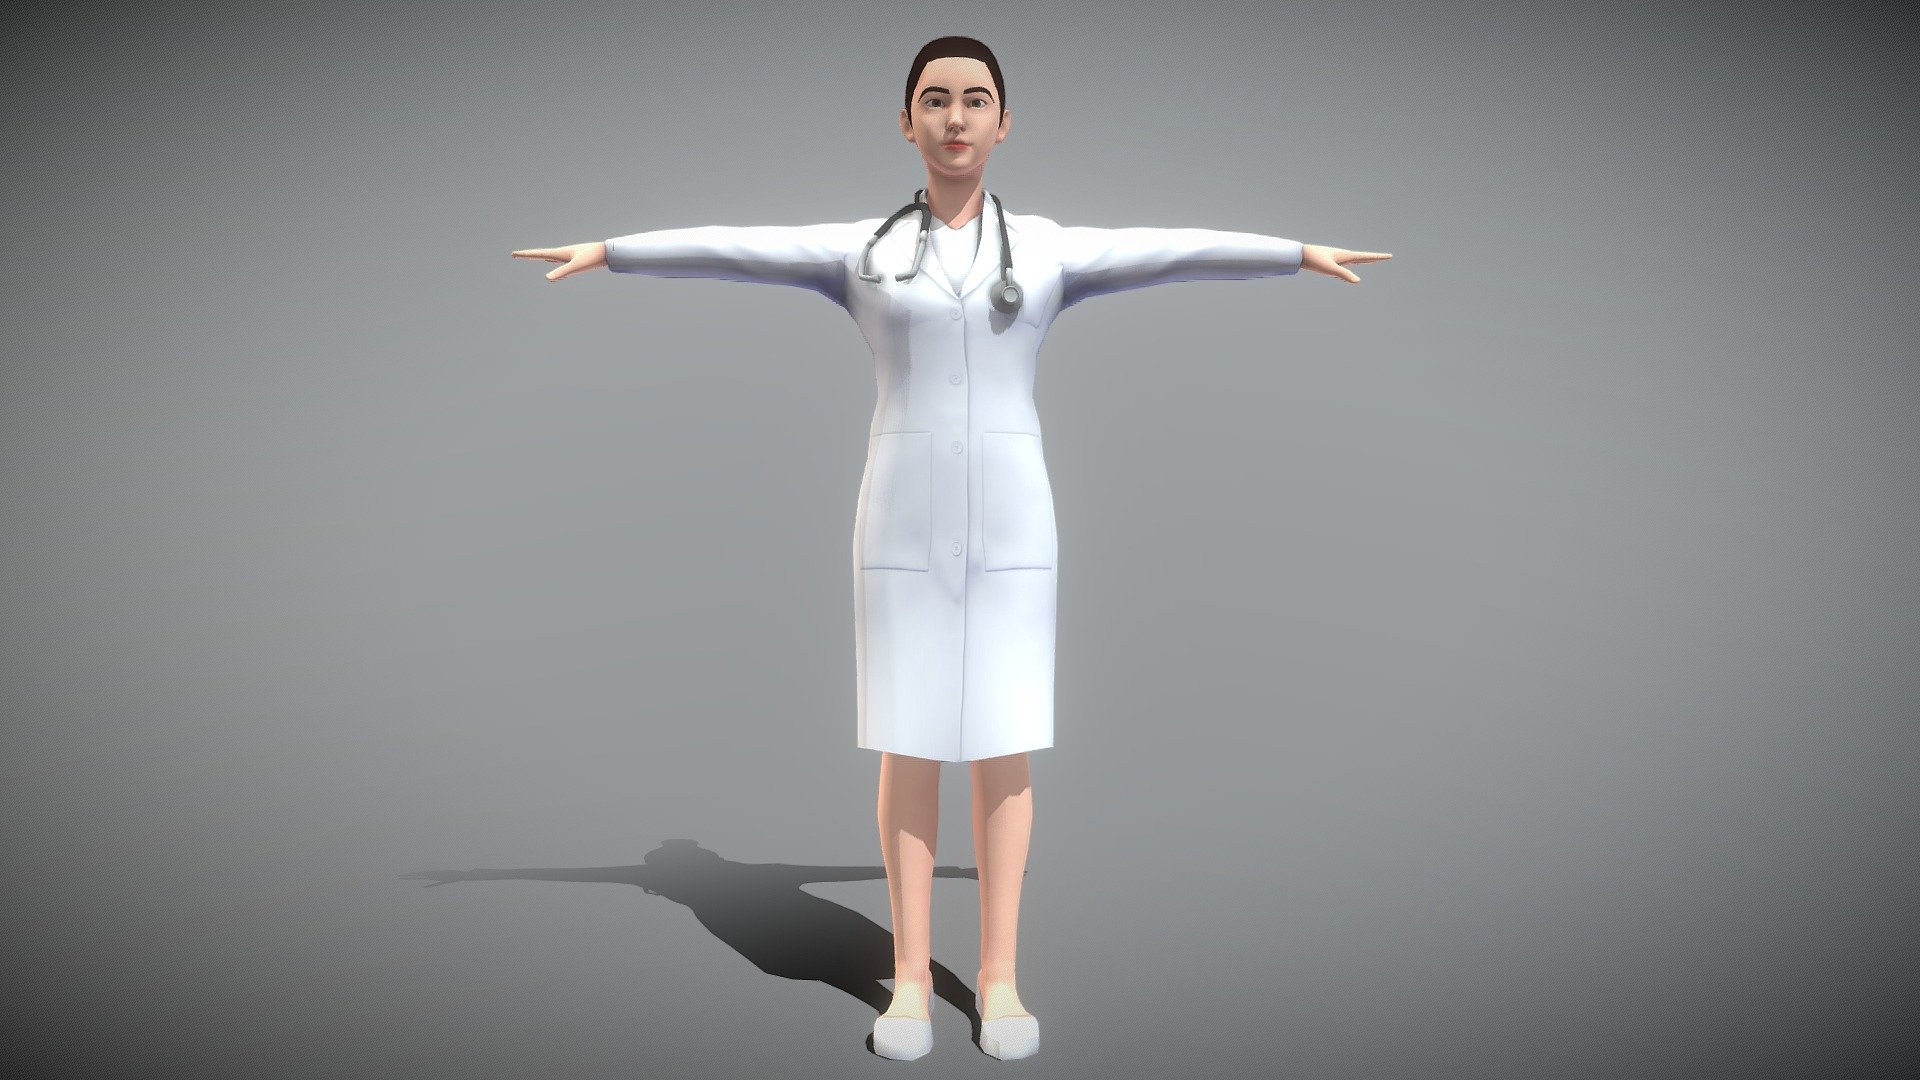 This is a female doctor character model. It contains some common character animations.

If you have any questions, please feel free to contact me.

E-mail: JeremyLiu48@gmail.com - Female Doctor - 3D model by Jeremy (@jeremyliu48) 3d model